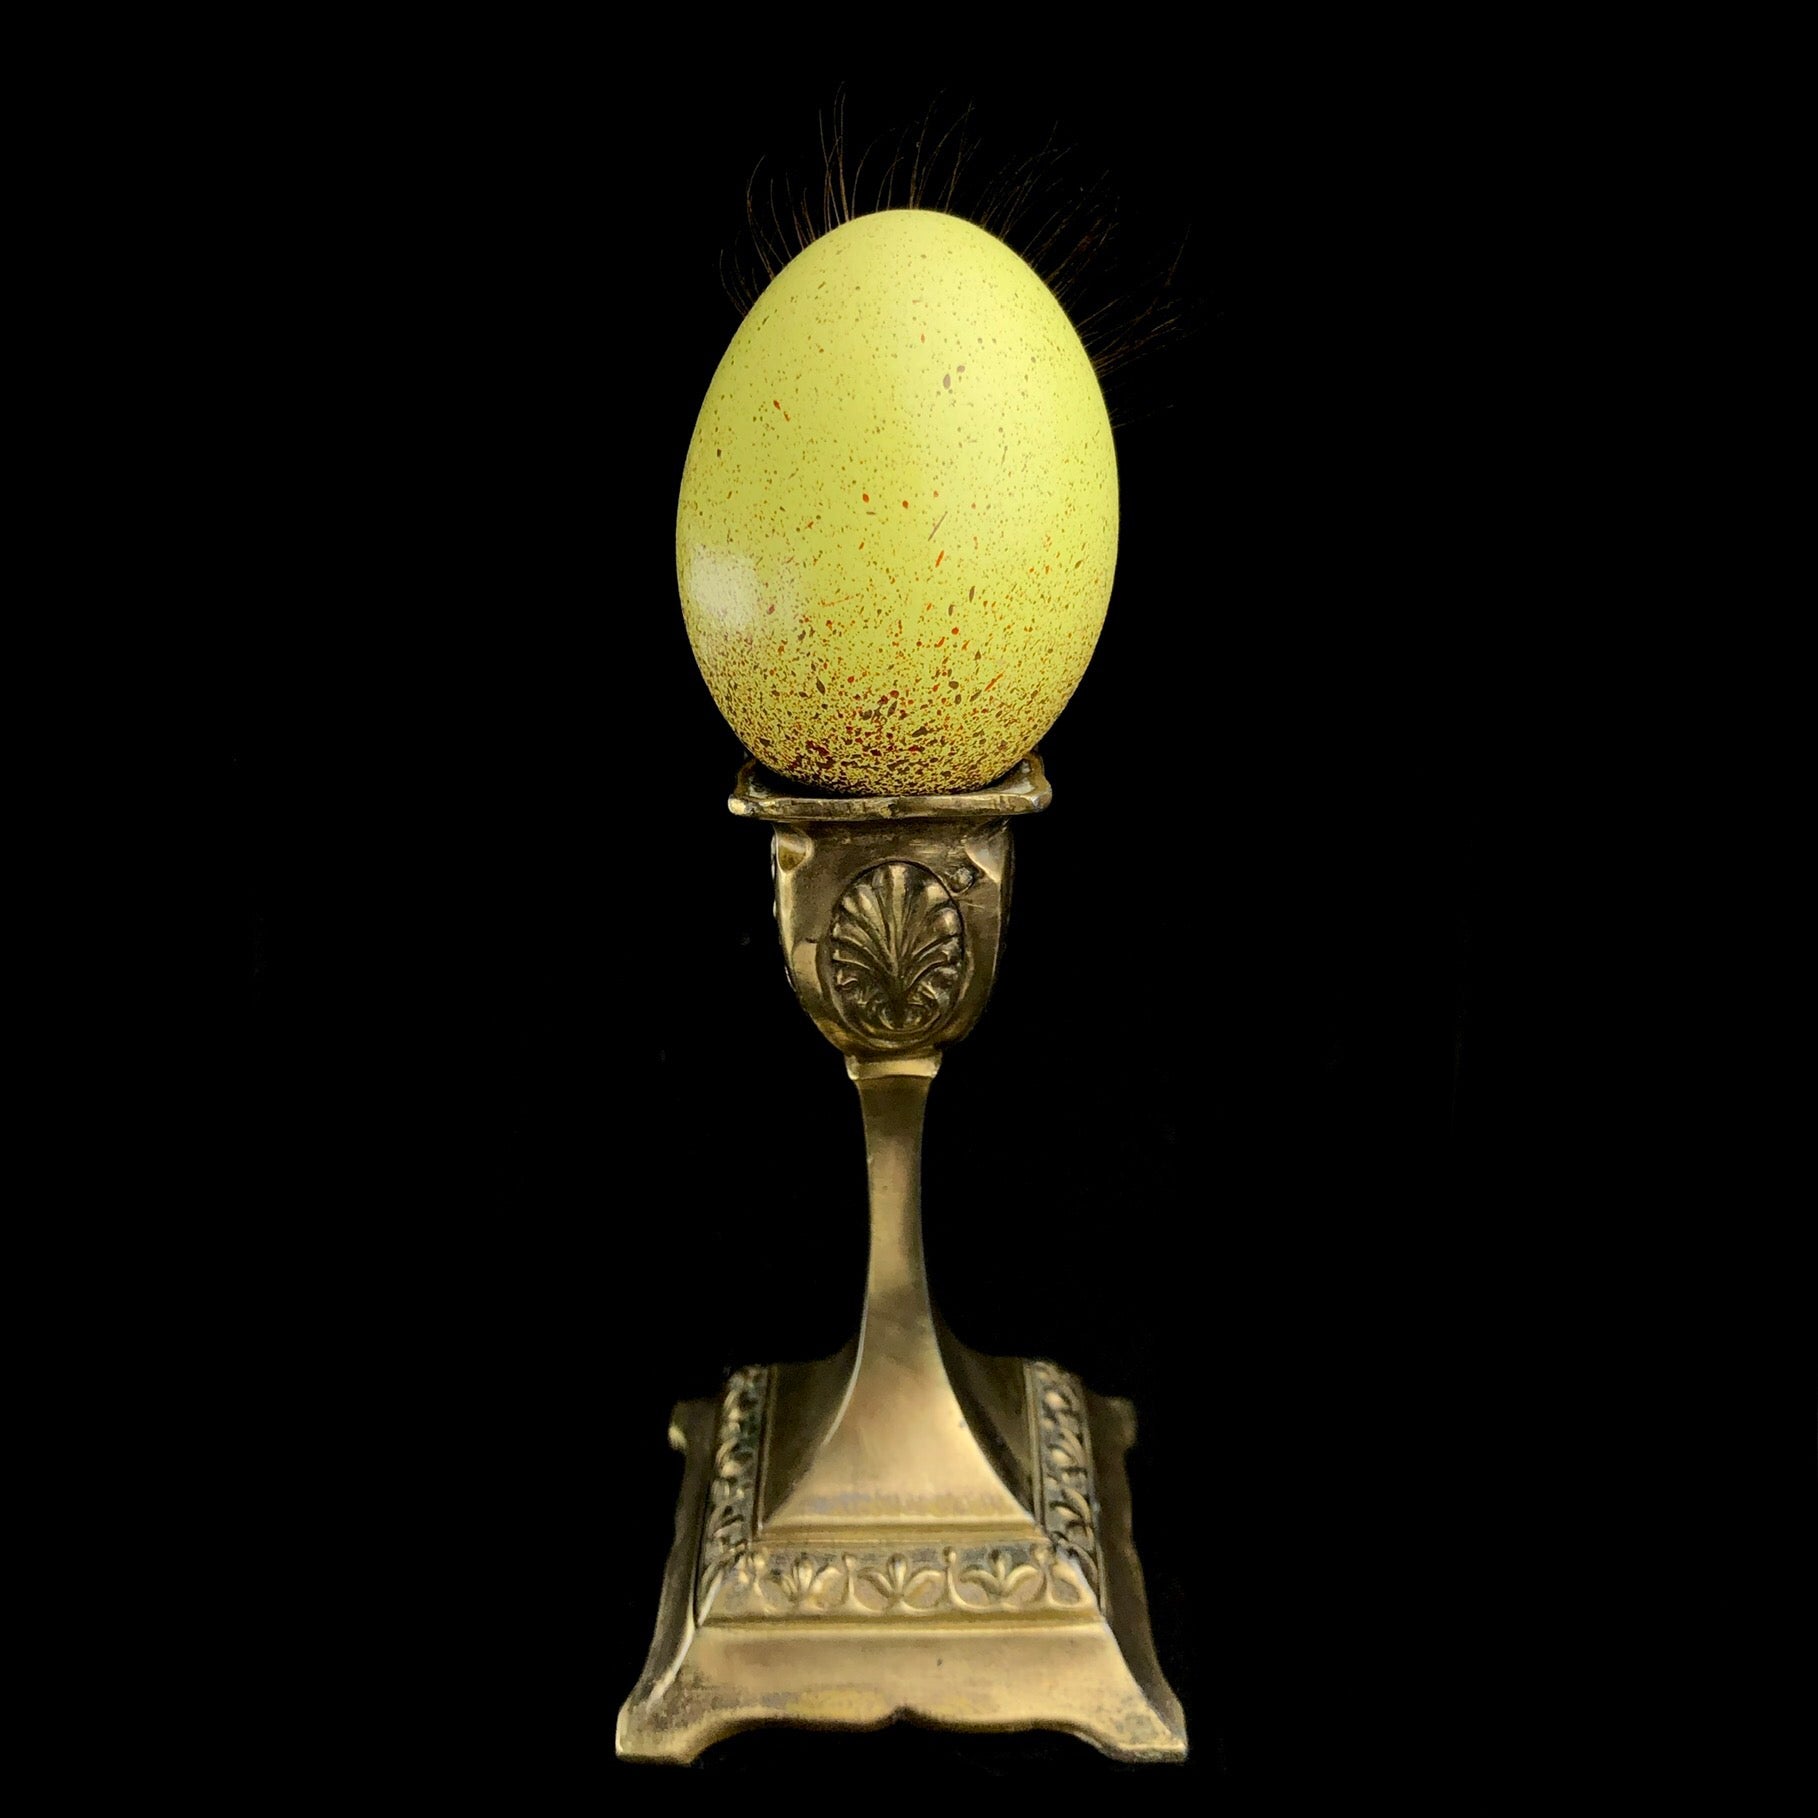 The back view of Verona the Chicken Egg, yellow with brown spots sitting on brass stand